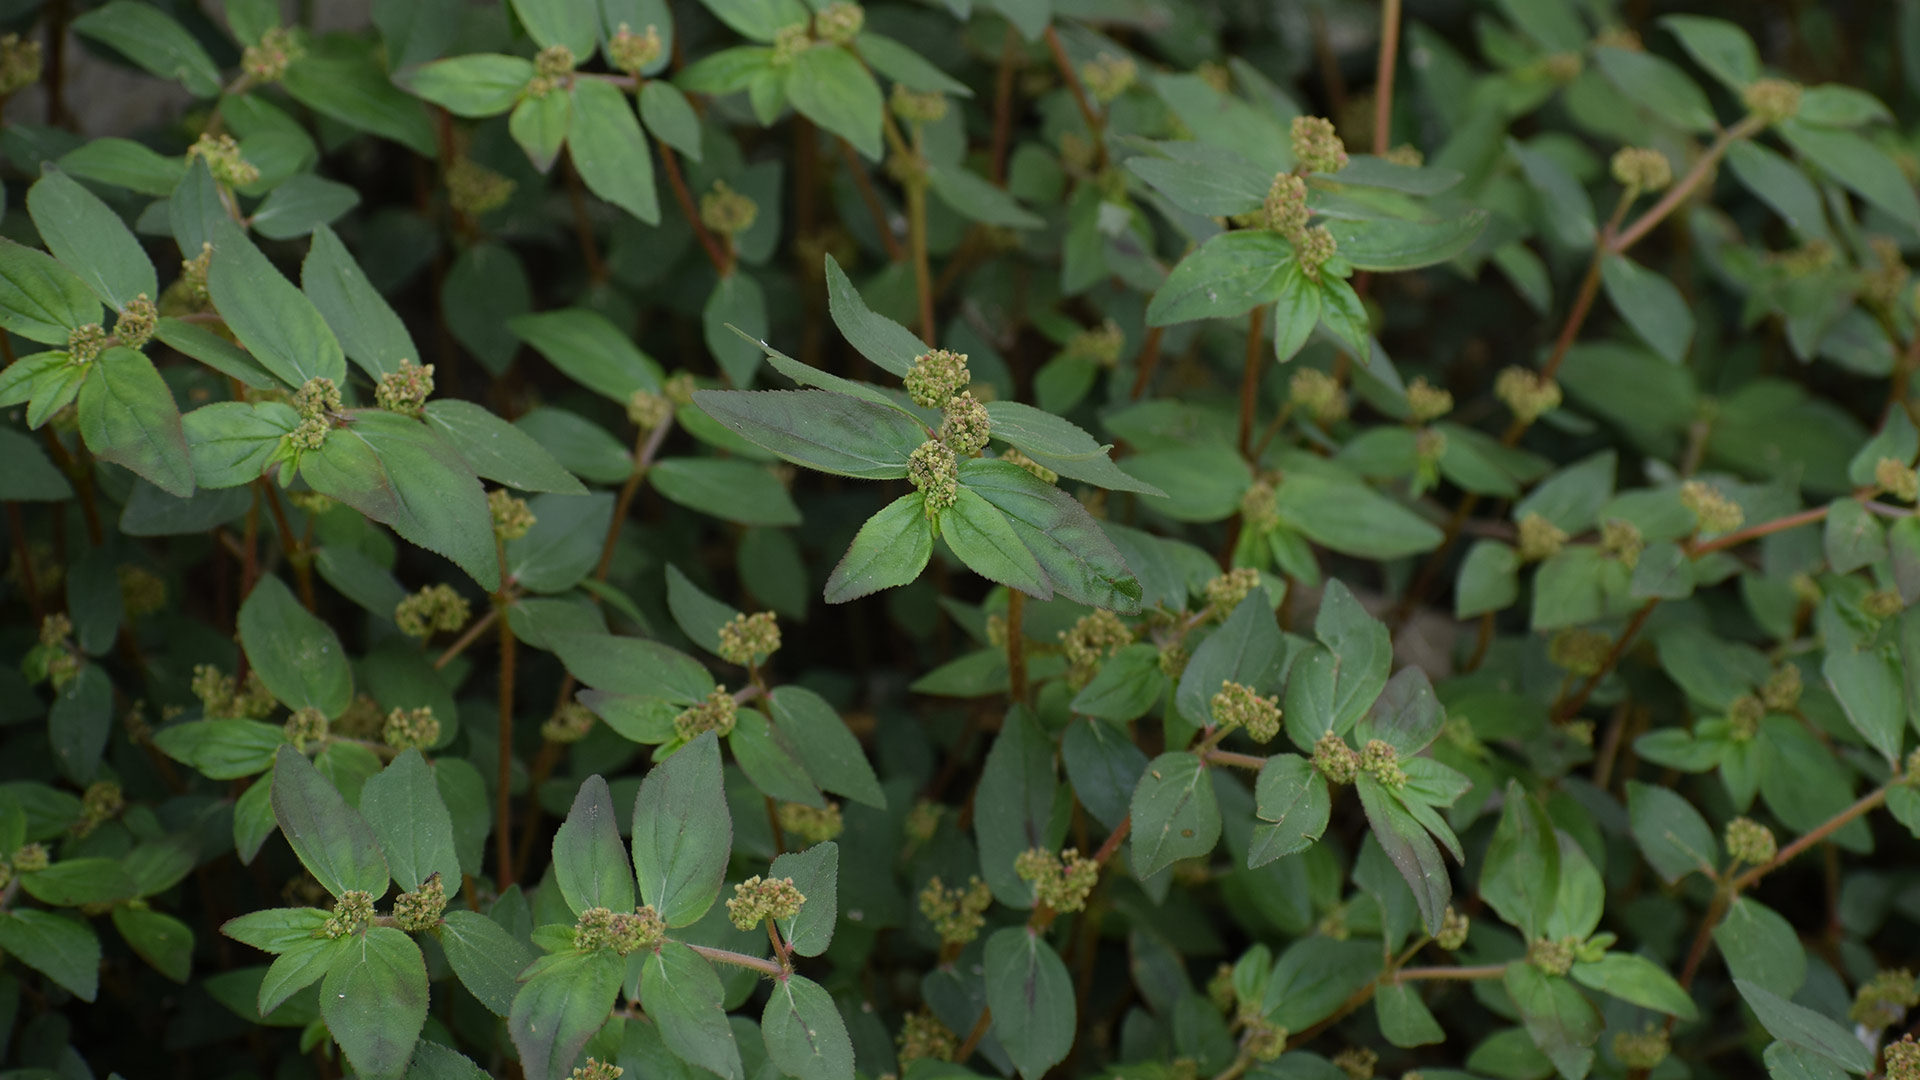 A spurge weed has become overgrown on a lawn near Wildwood, FL.